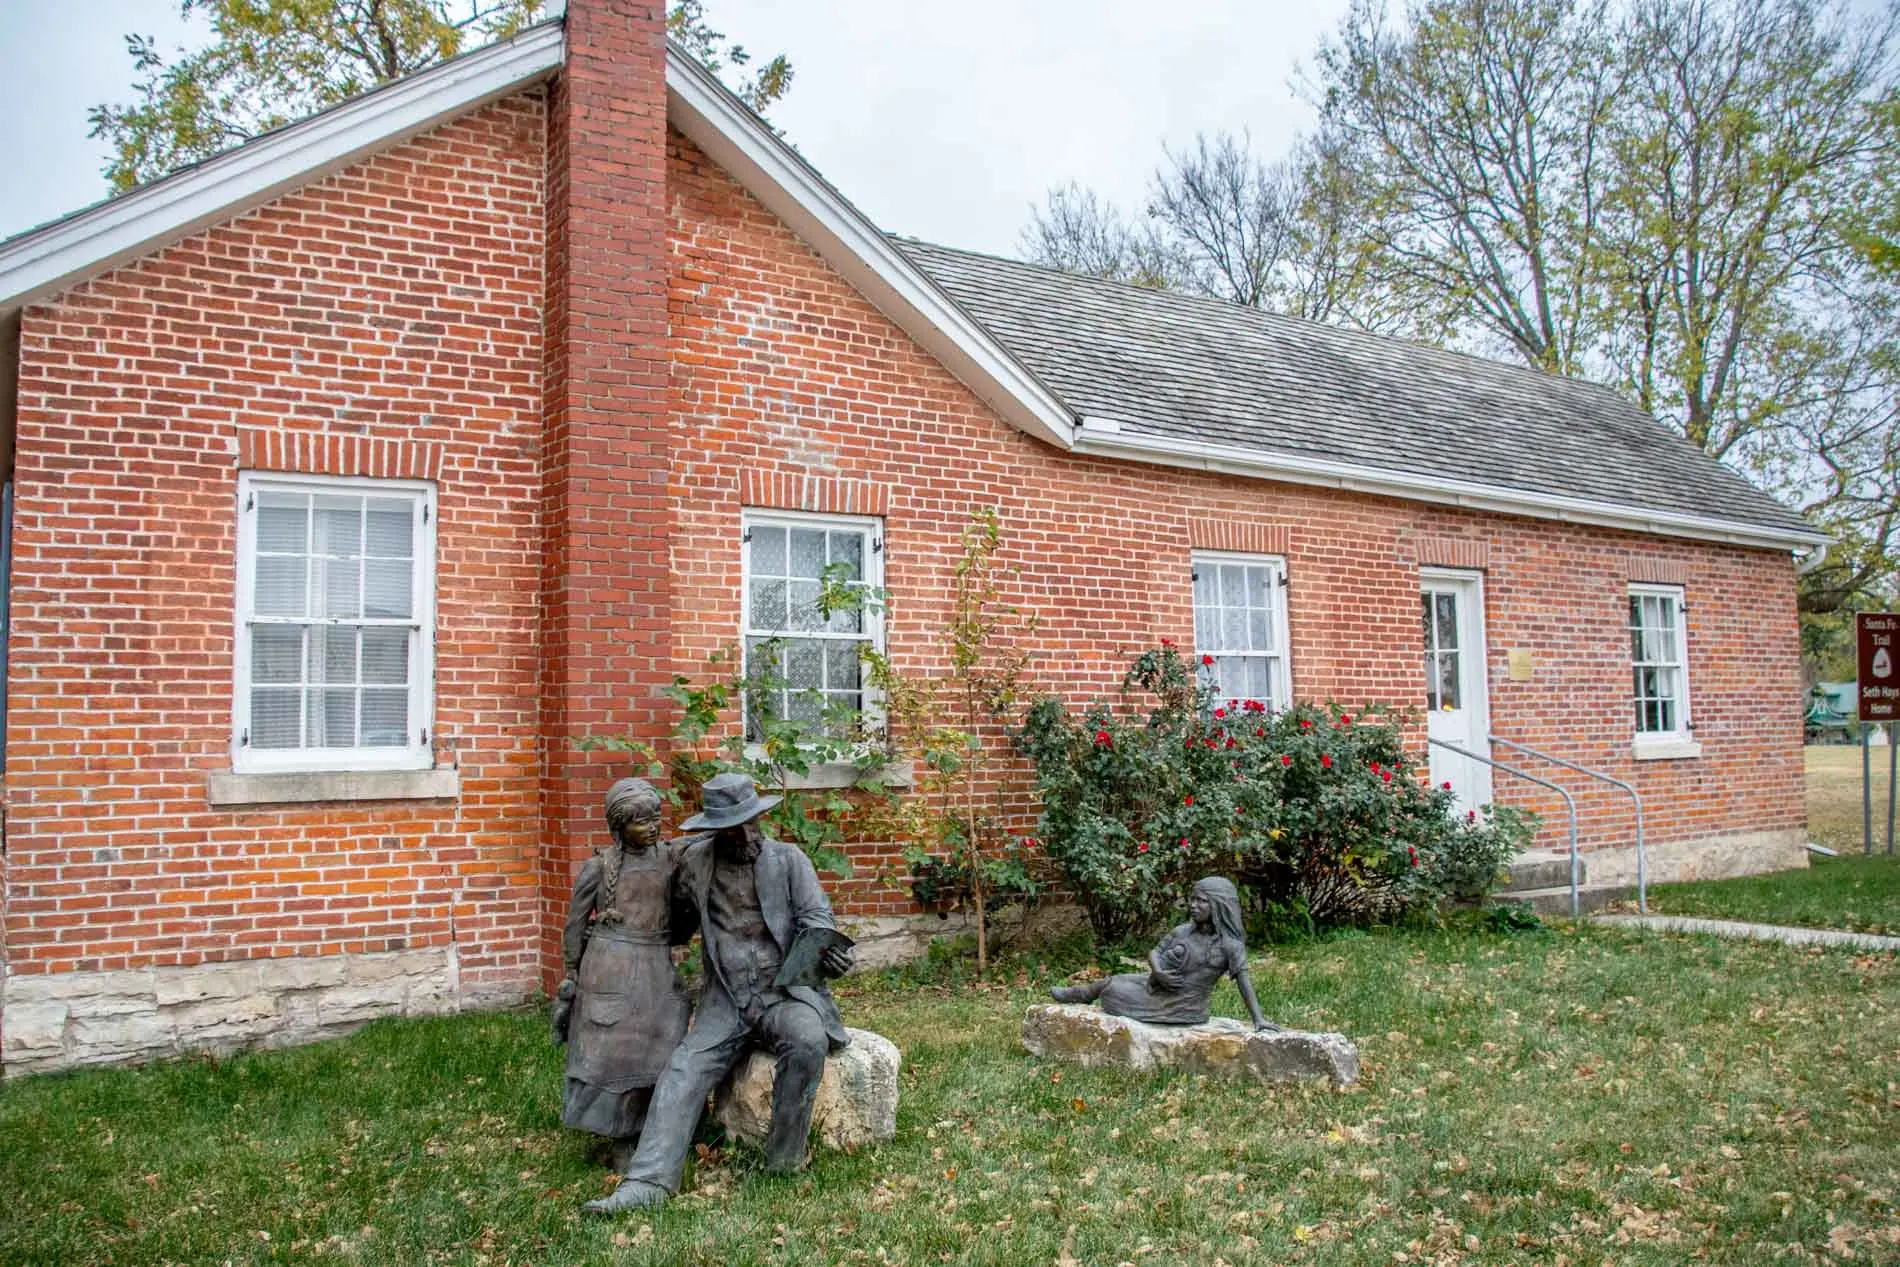 Red brick home with sculptures of children playing in front